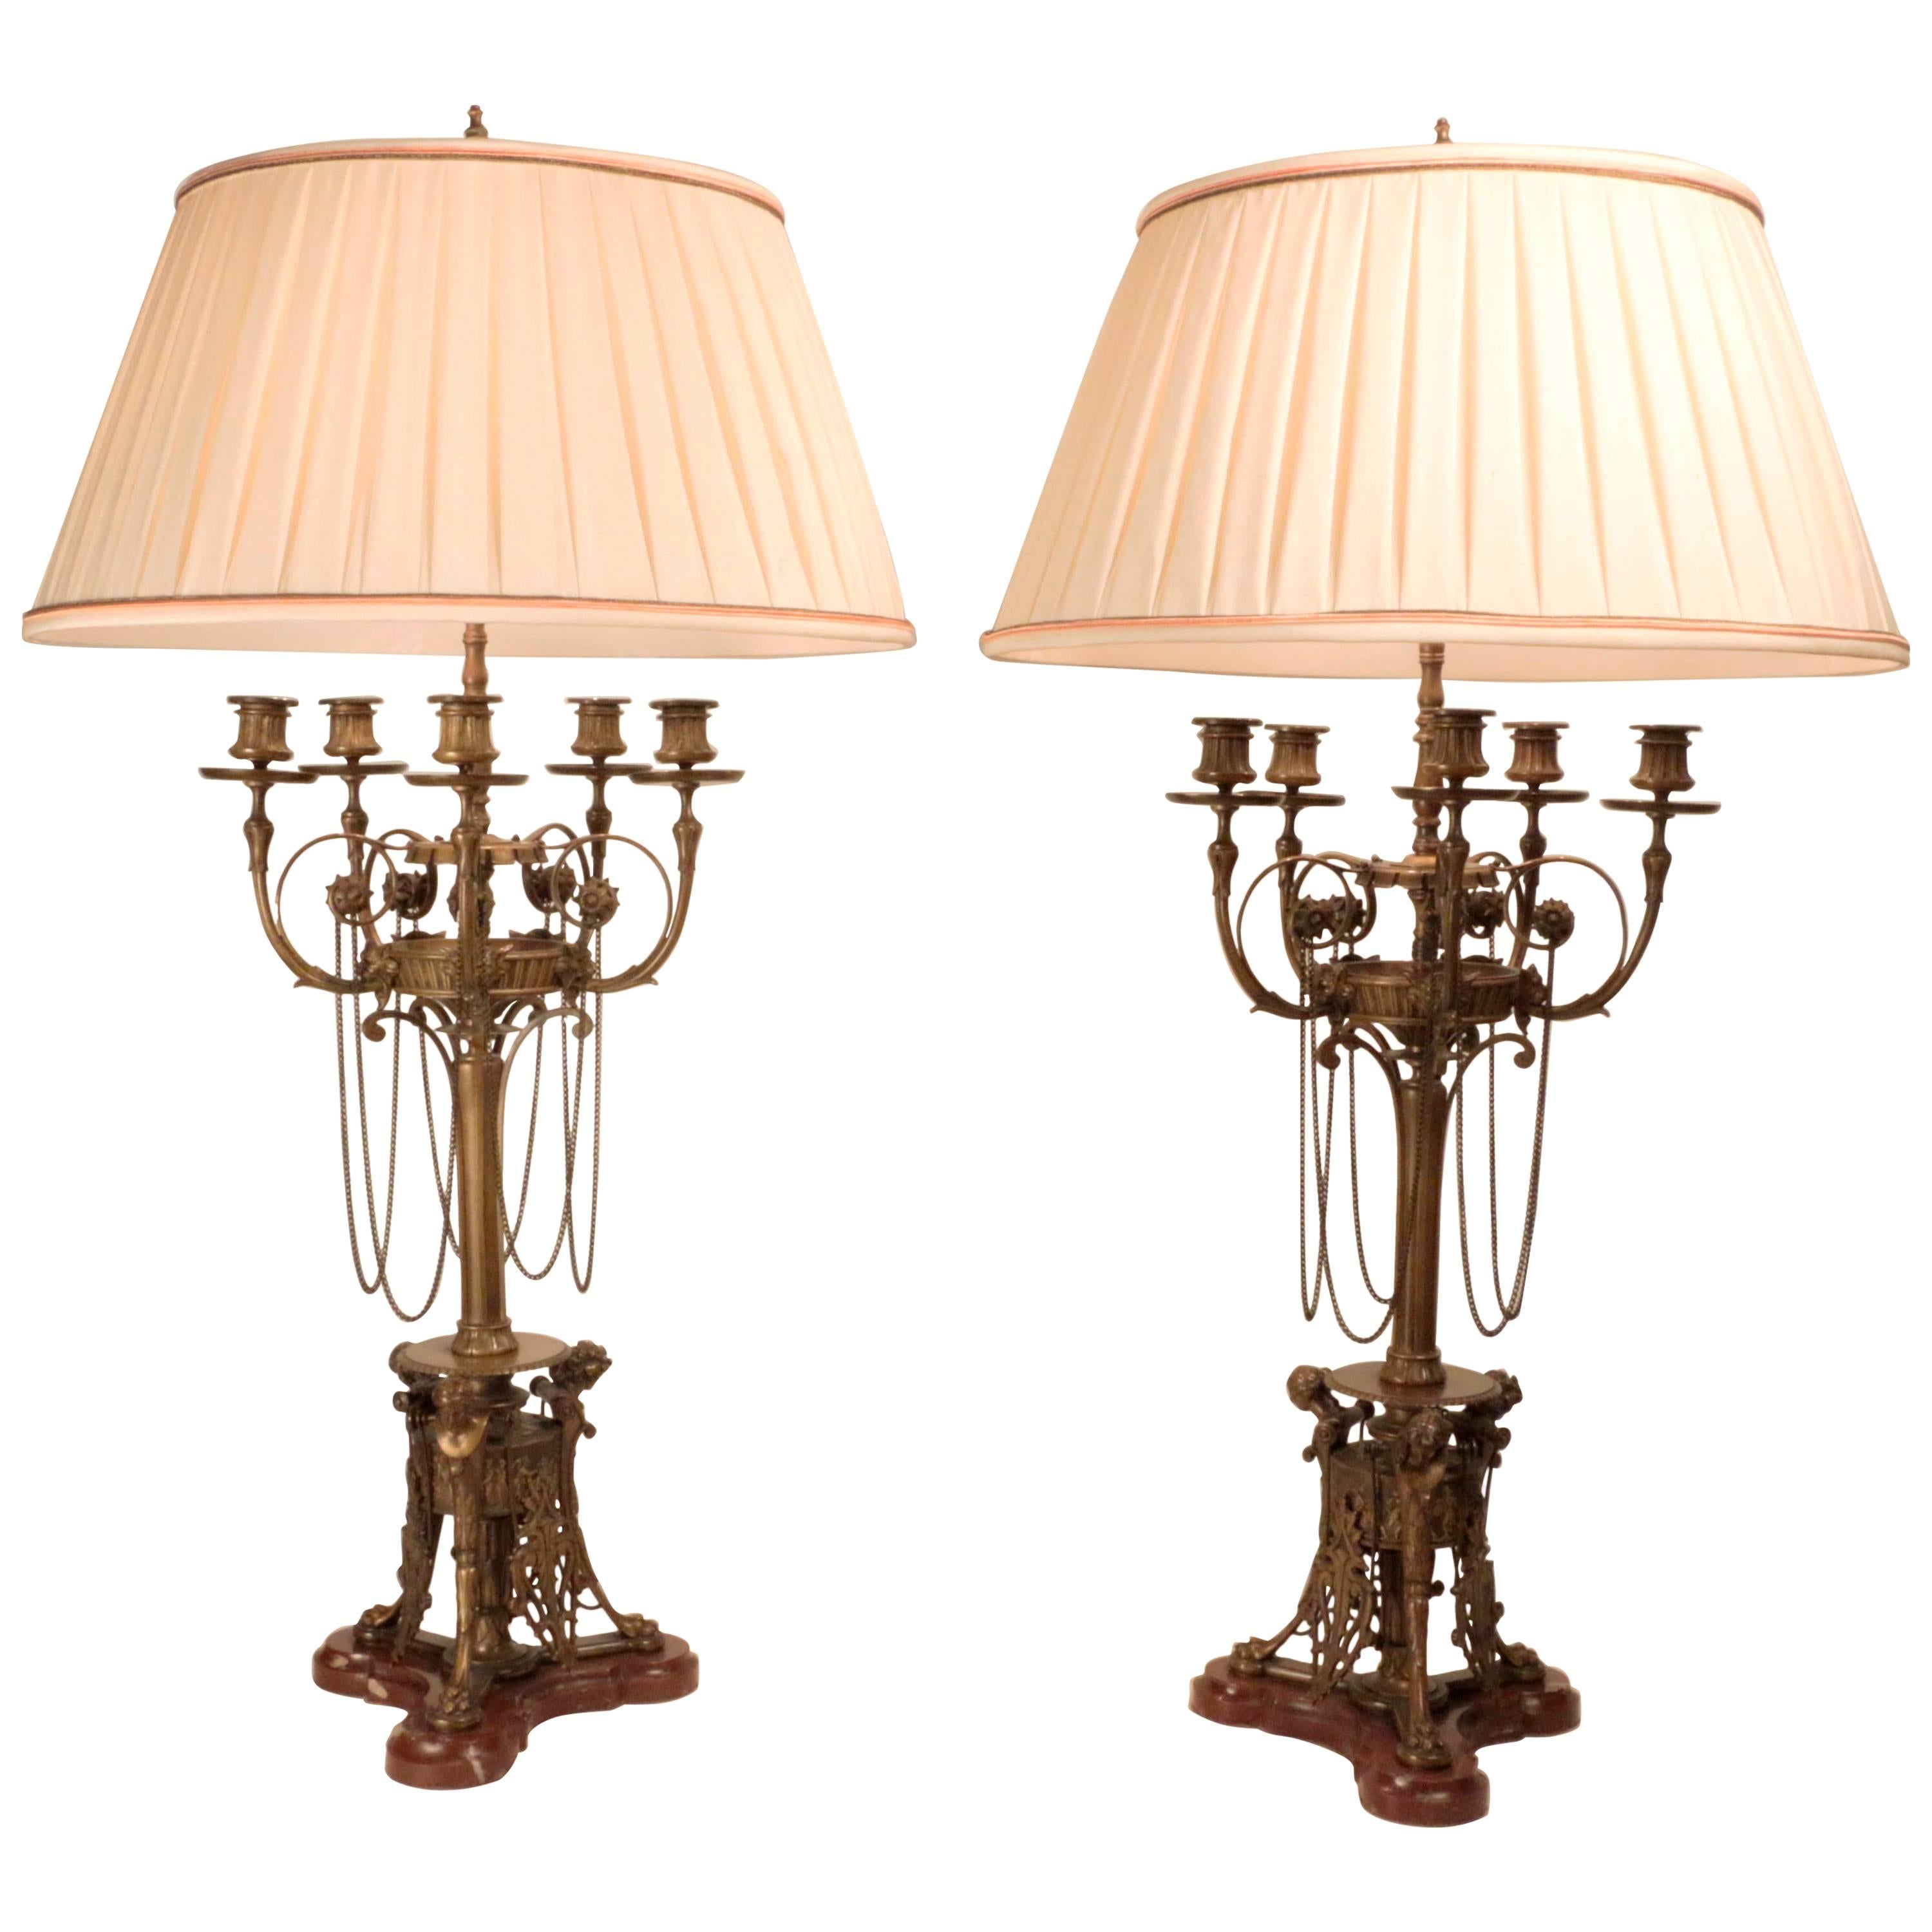 Pair of Renaissance Revival Five-Arm Candelabra Mounted as Lamps